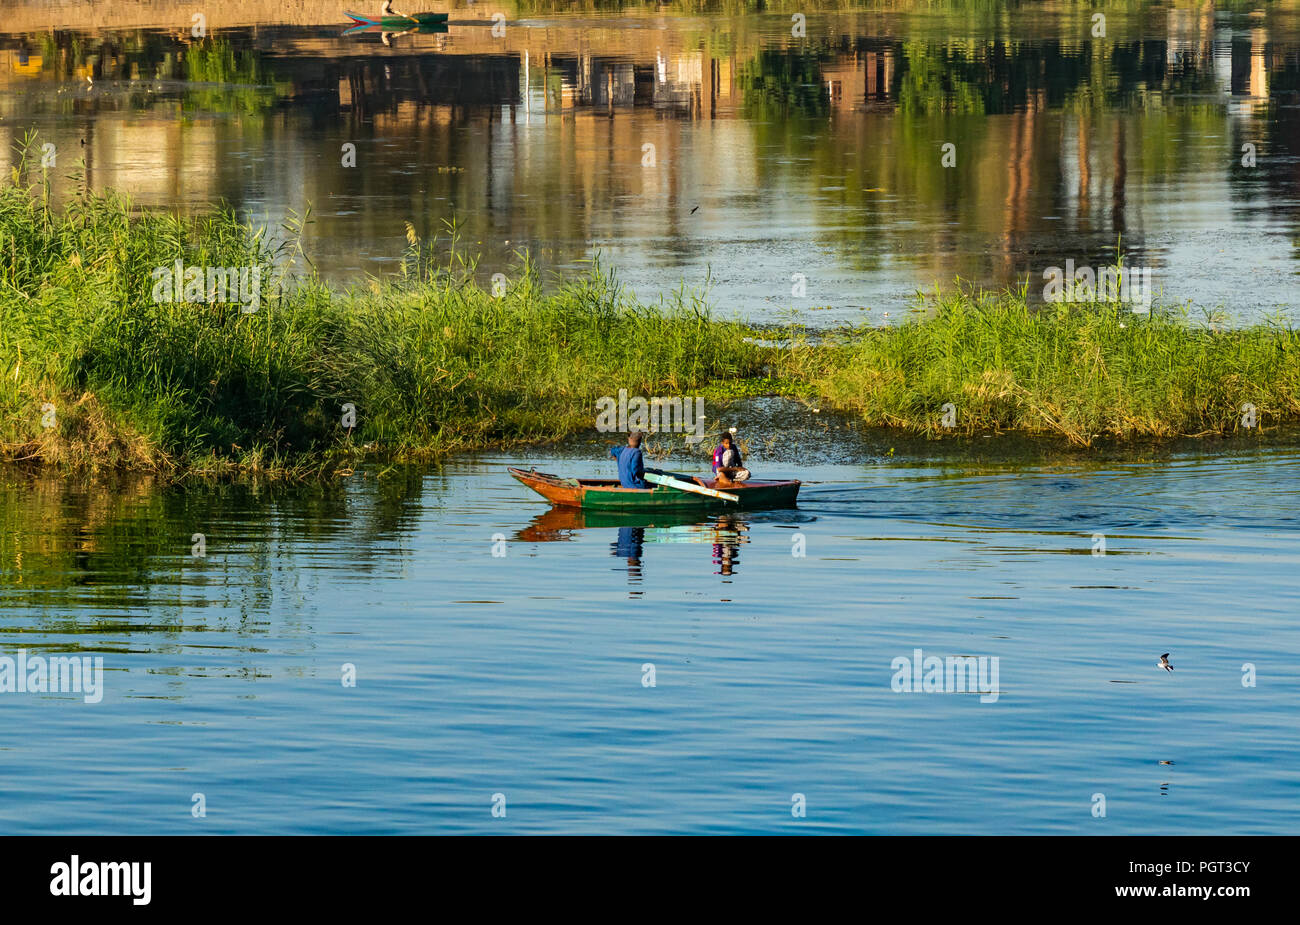 Egyptian local man rowing old boat with boy in early morning sunlight, with water reflections, Nile River, Egypt, Africa Stock Photo